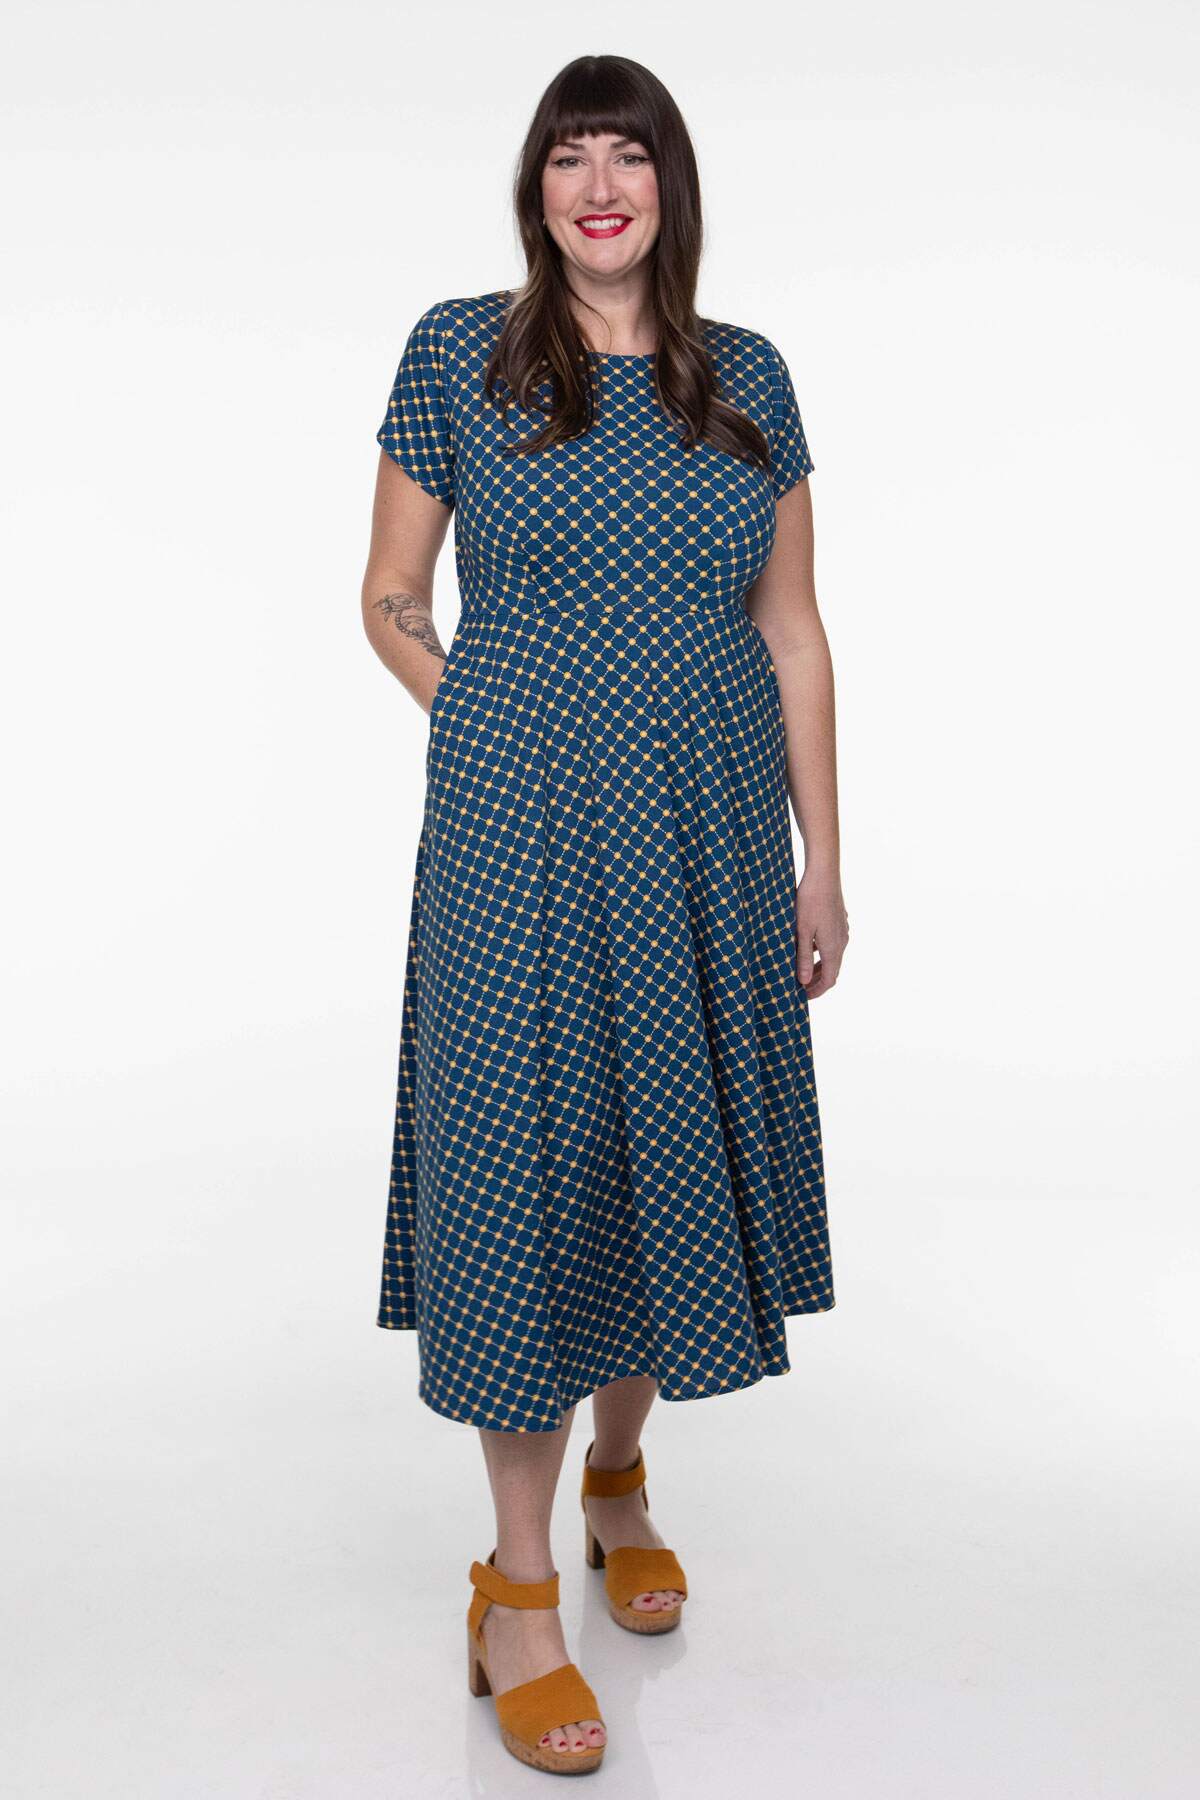 Katherine Dress in Navy and Gold Cross Dots by Karina Dresses